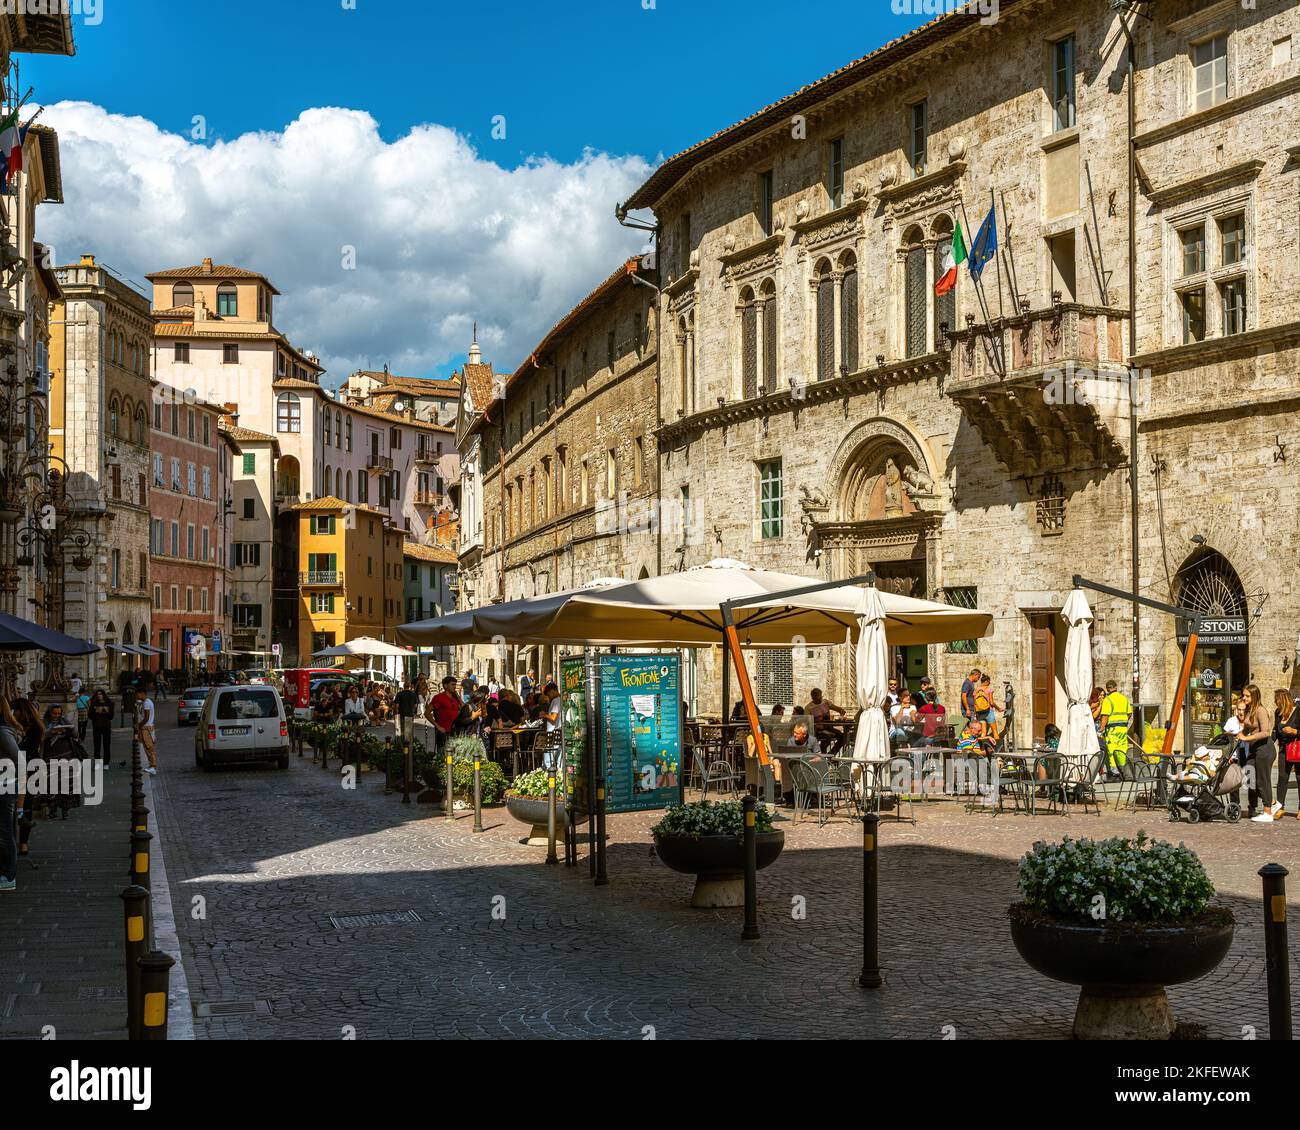 Historical, medieval palaces and houses in Piazza Giacomo Matteotti or Piazza Grande in Perugia. Perugia, Umbria, Italy, Europe Stock Photo